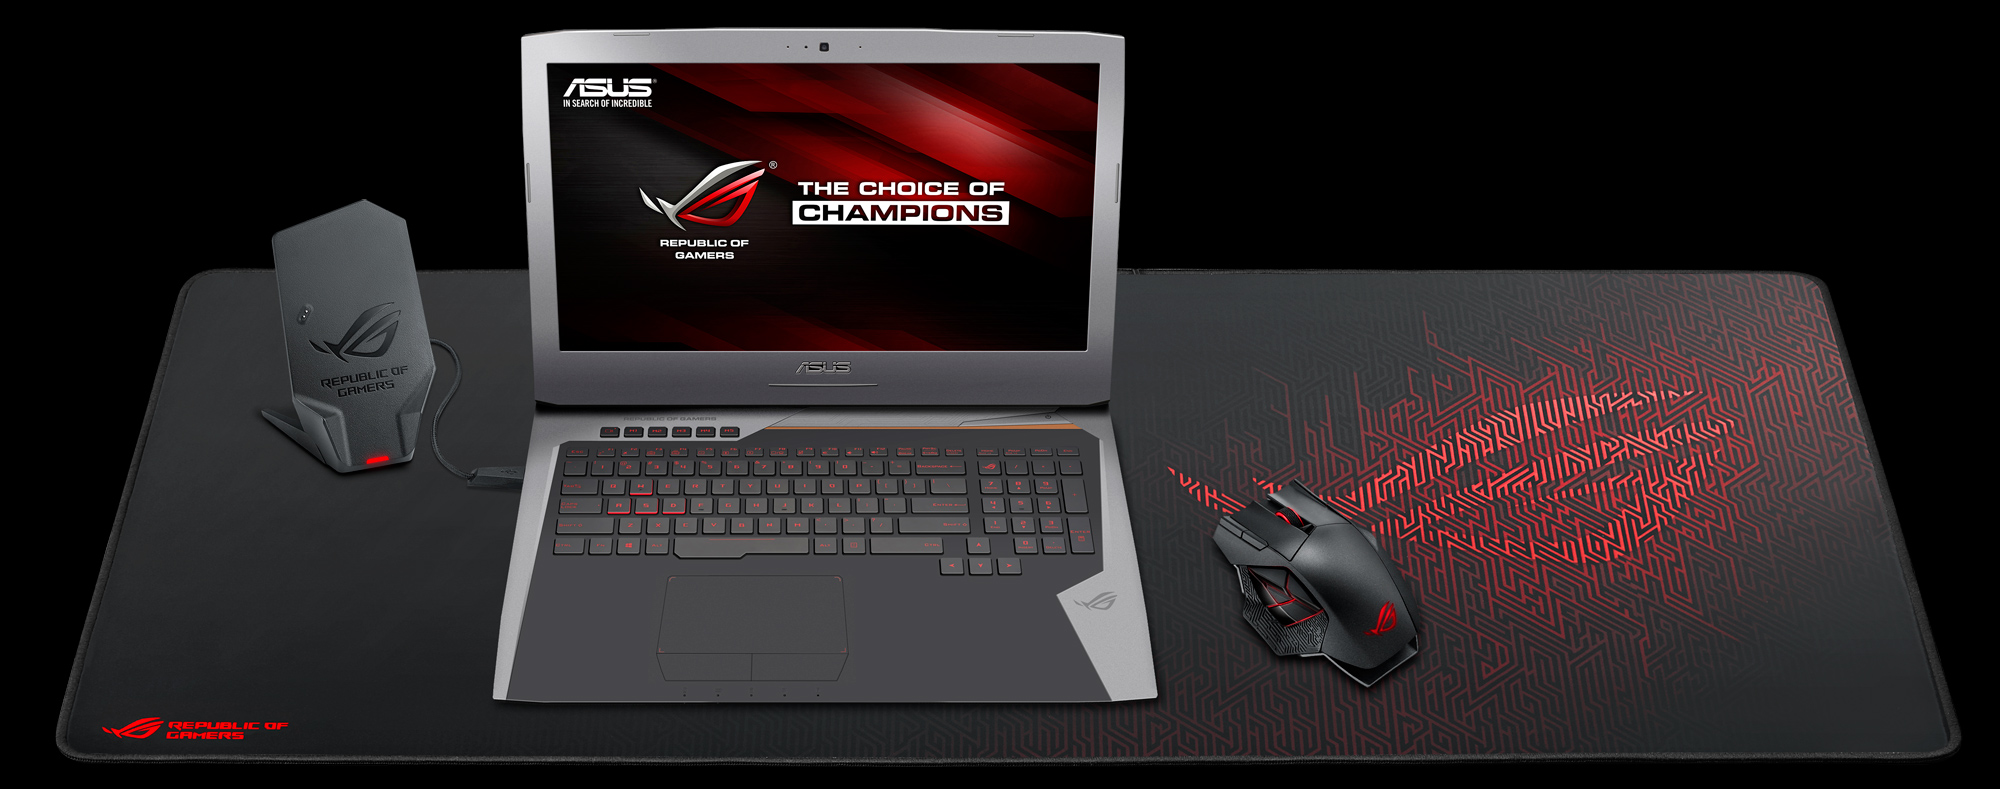 Asus Rog Sheath Extra Large Mouse Pad Announced Legit Reviews